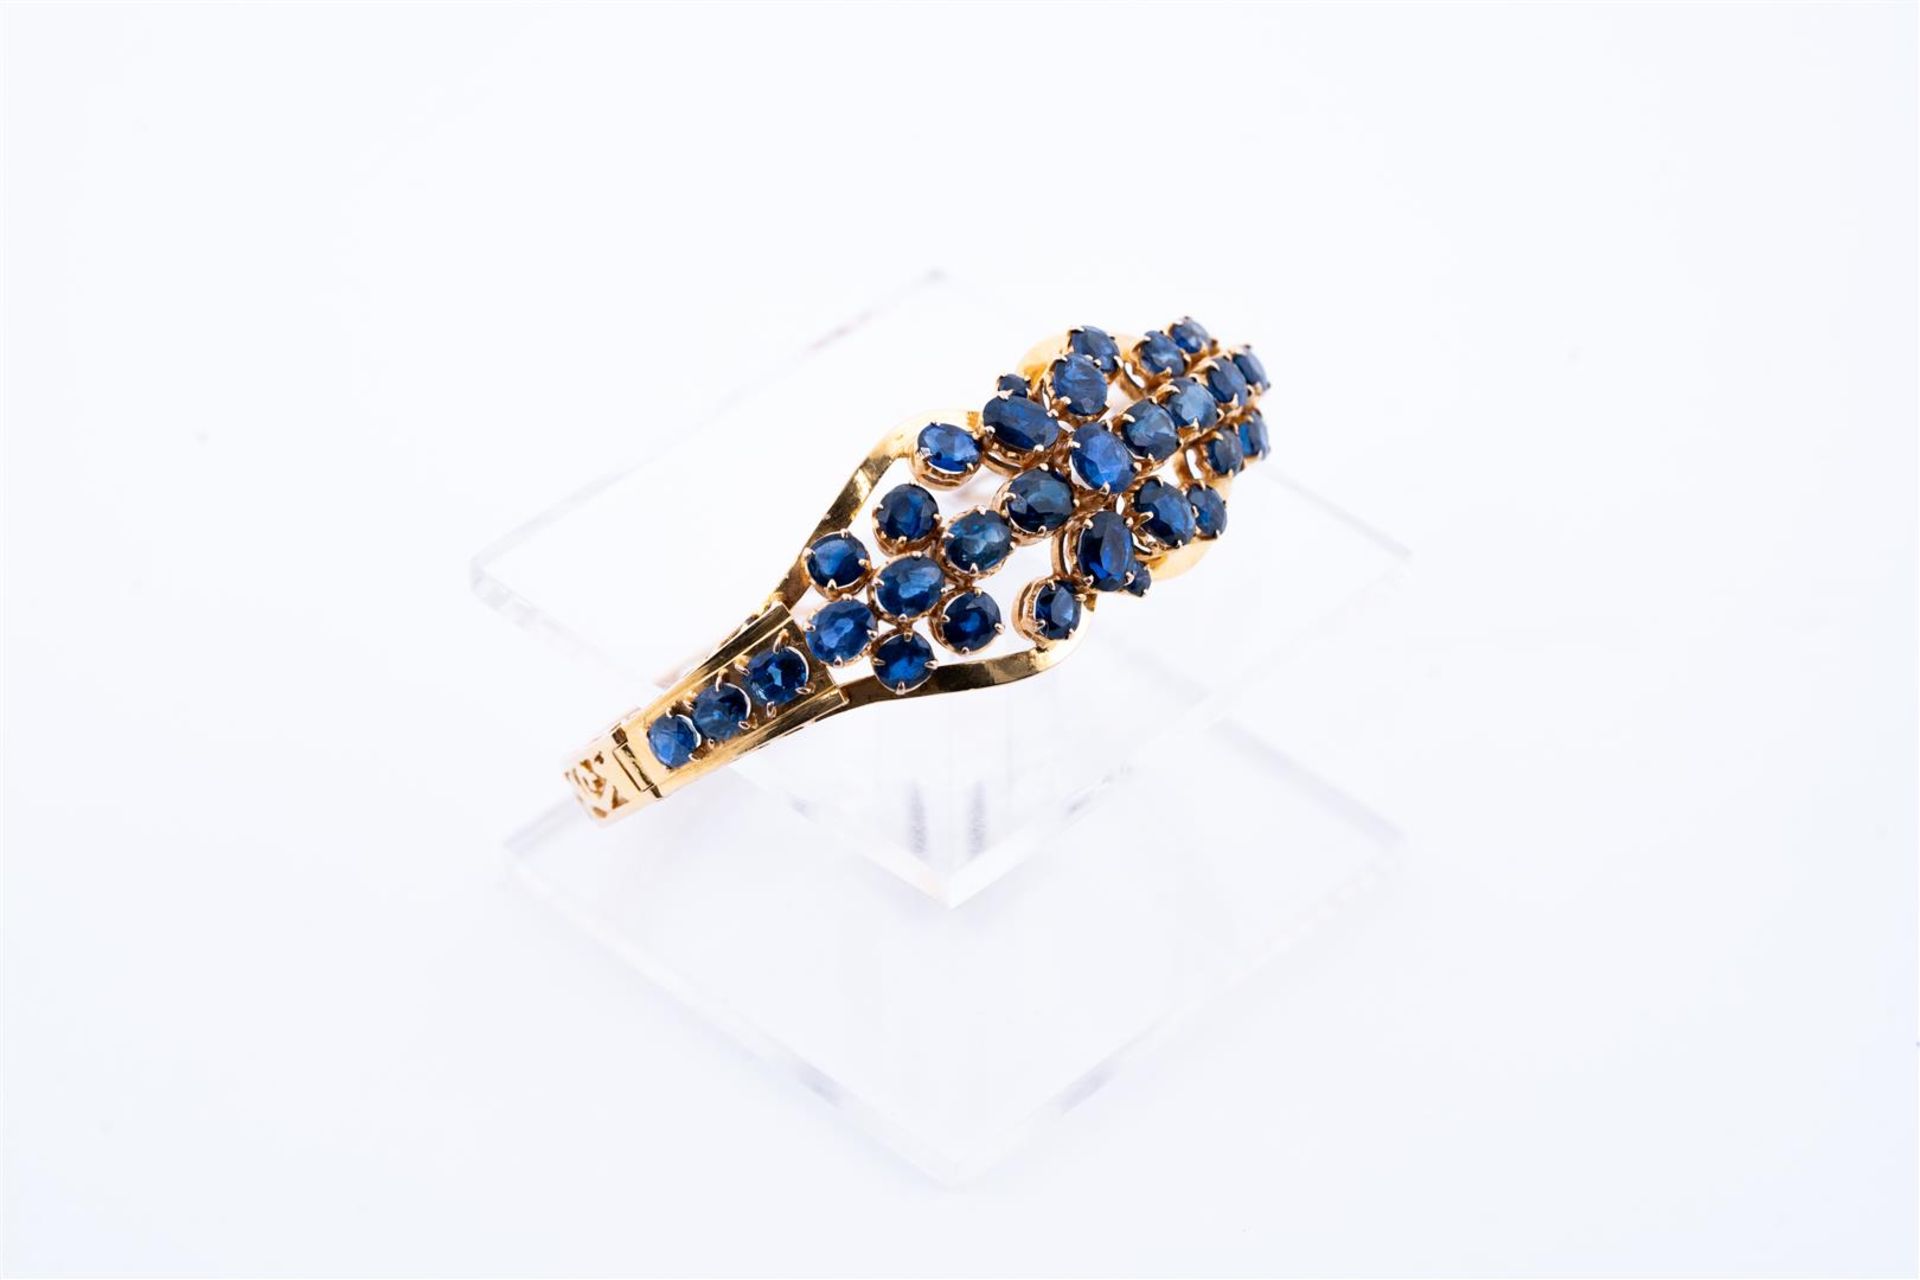 18kt Yellow gold cluster bracelet set with 33 blue sapphires. The bracelet has a beautiful openwork 